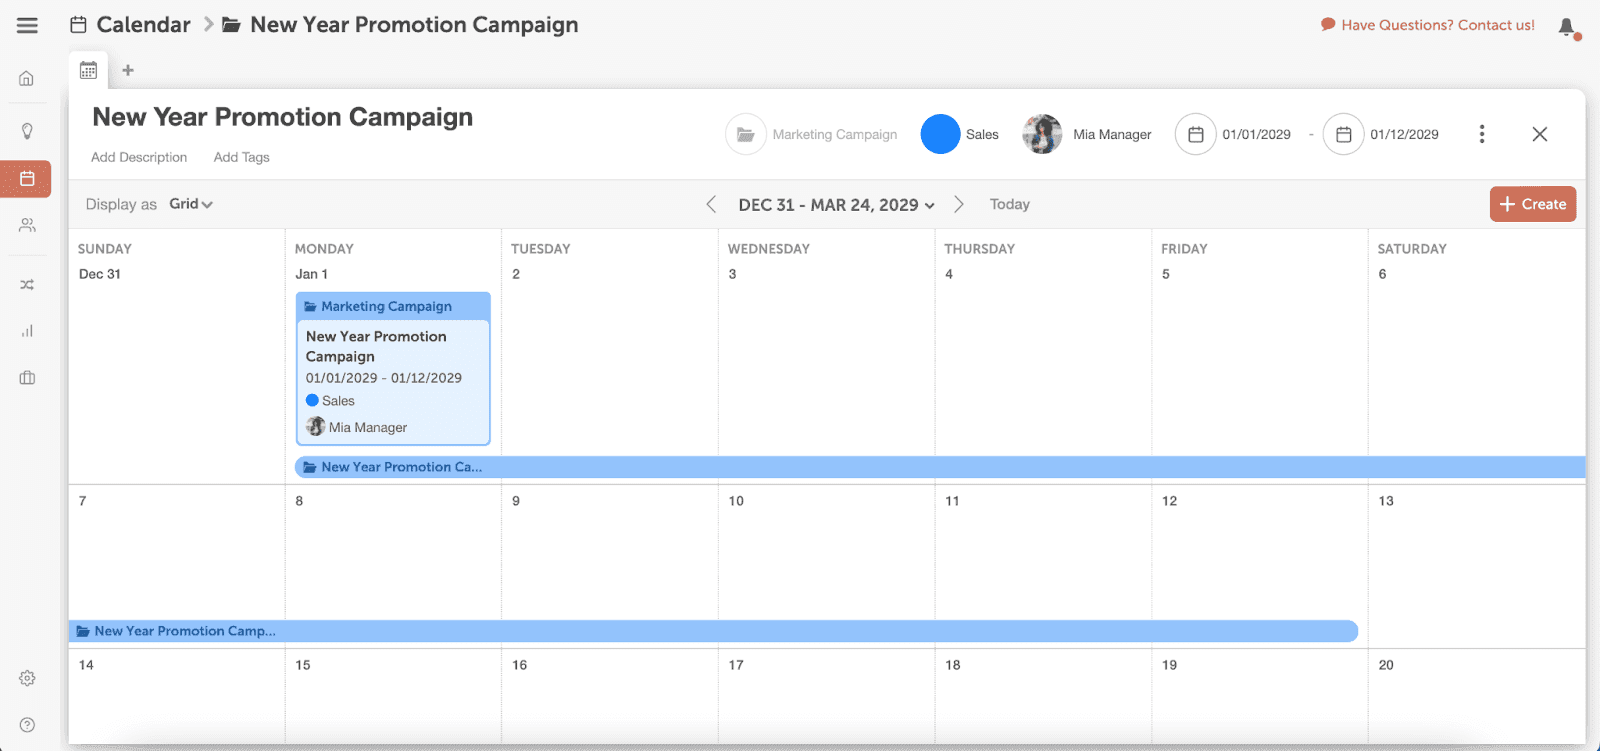 CoSchedule's marketing calendar allows users to create campaigns